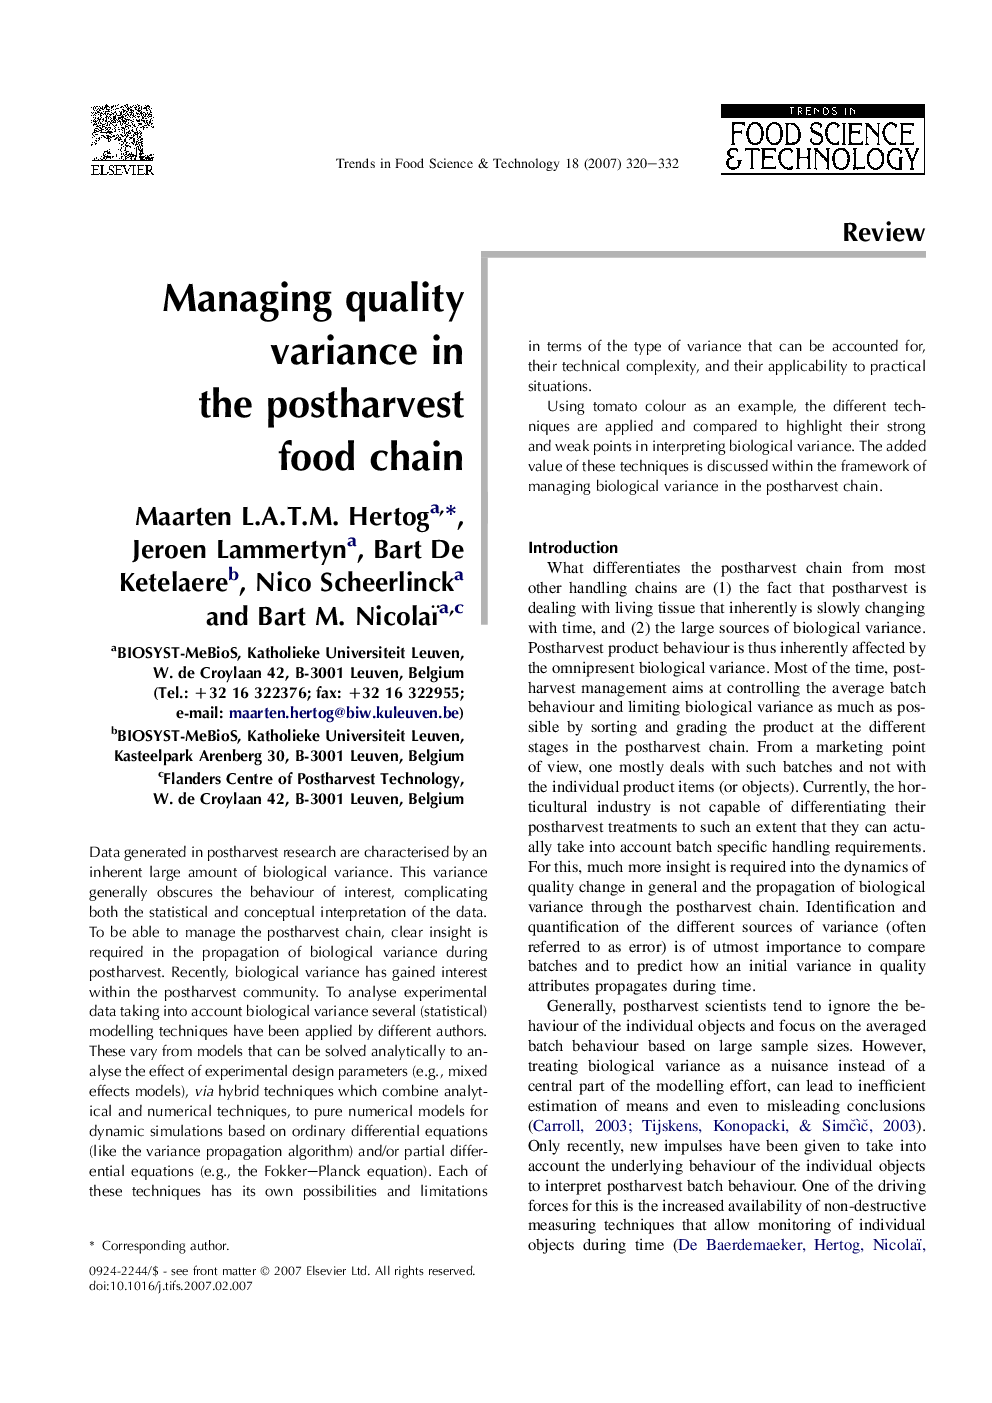 Managing quality variance in the postharvest food chain